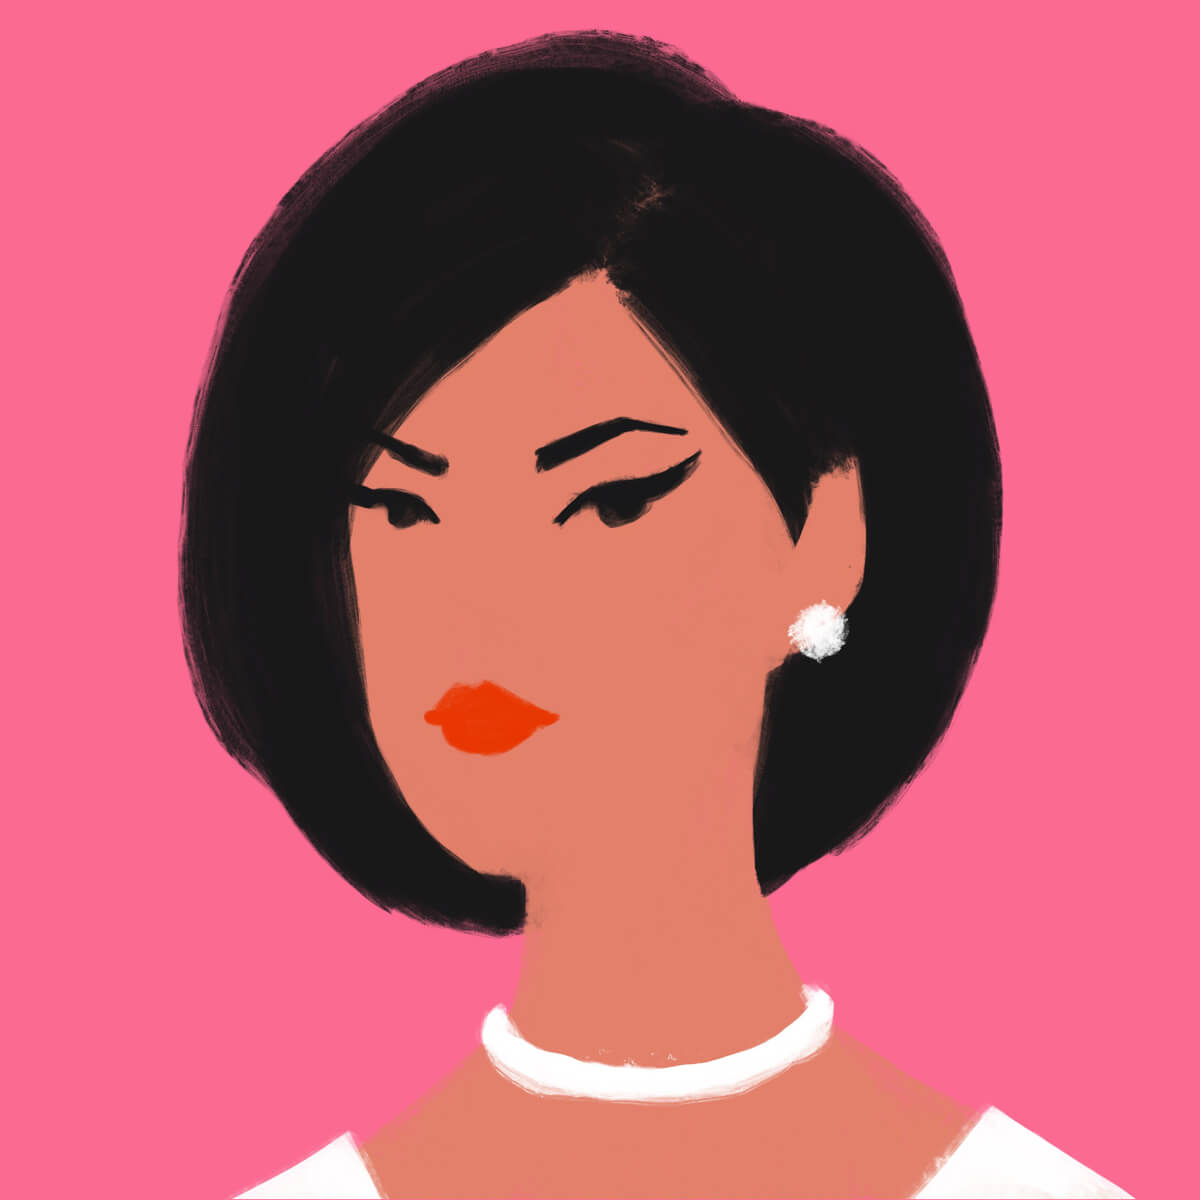 Posh Lady with pearl earrings, minimal style portrait.